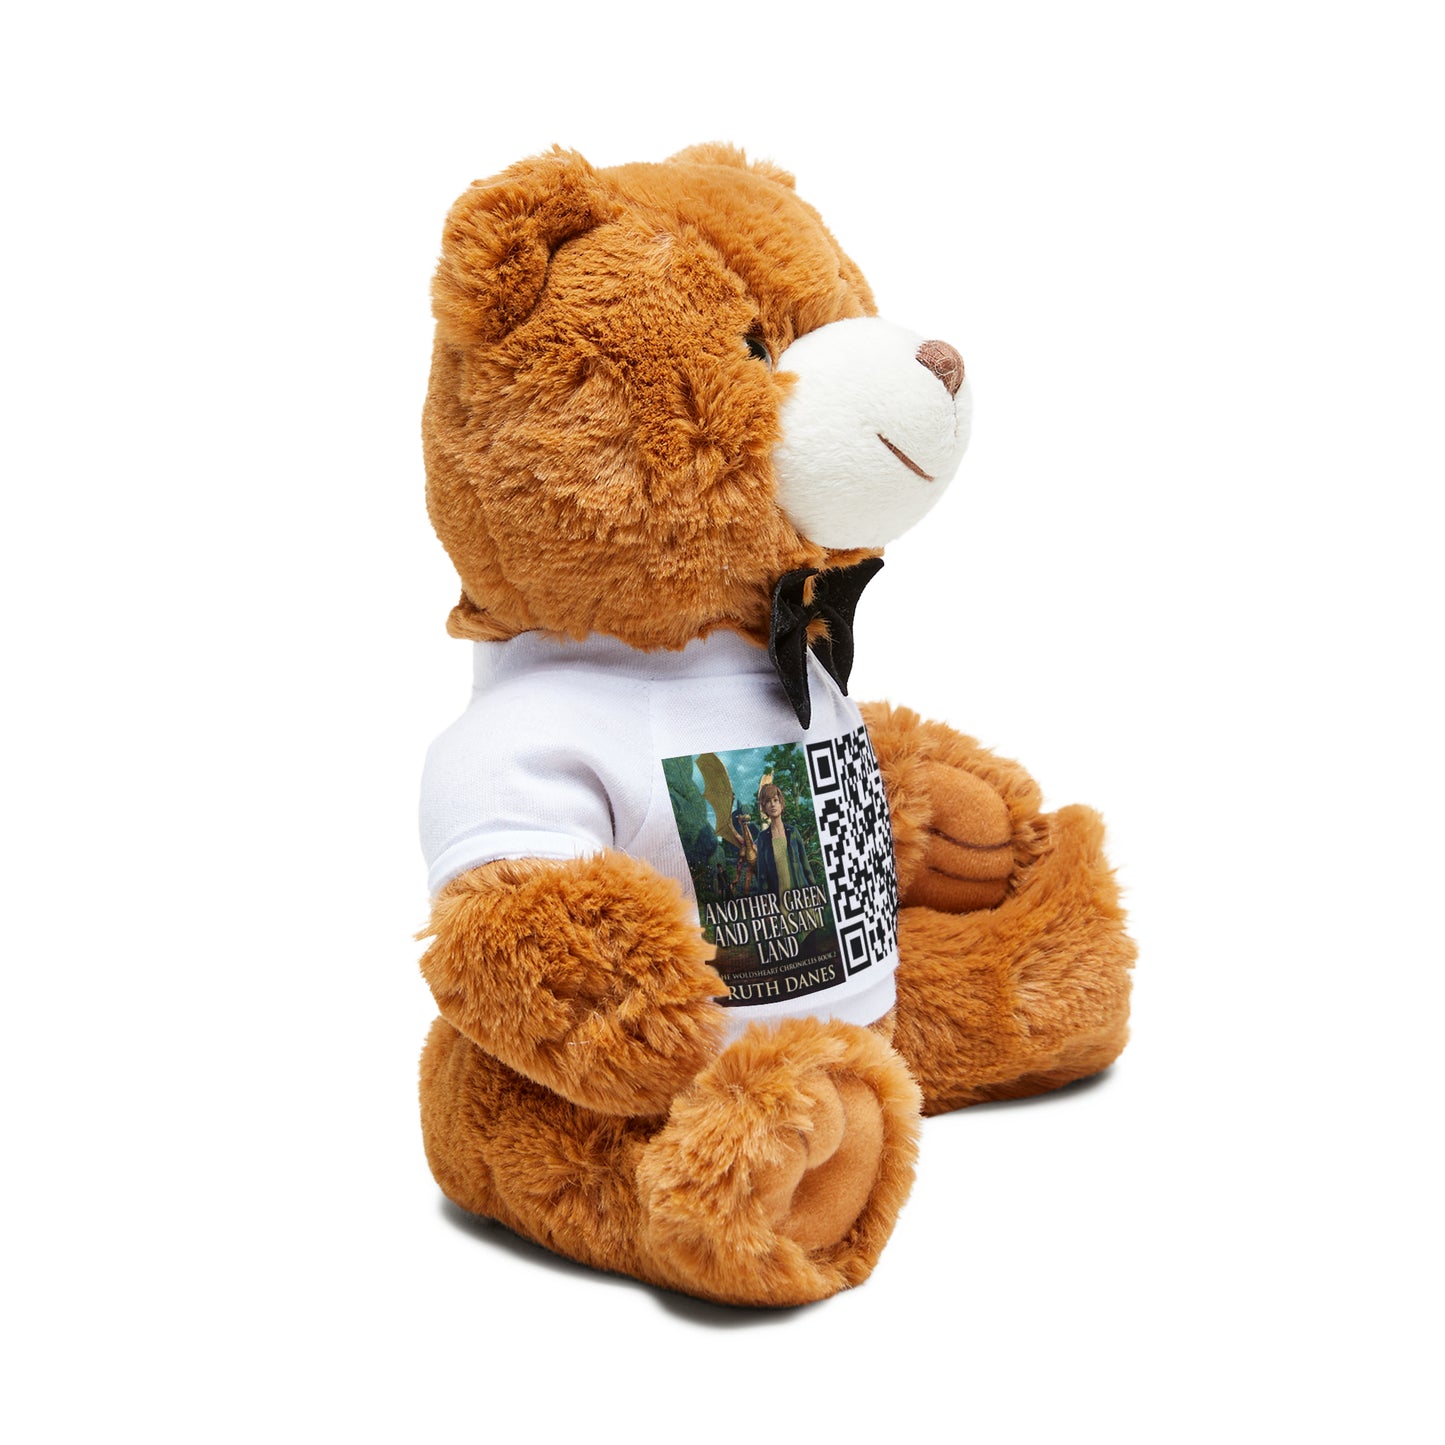 Another Green and Pleasant Land - Teddy Bear